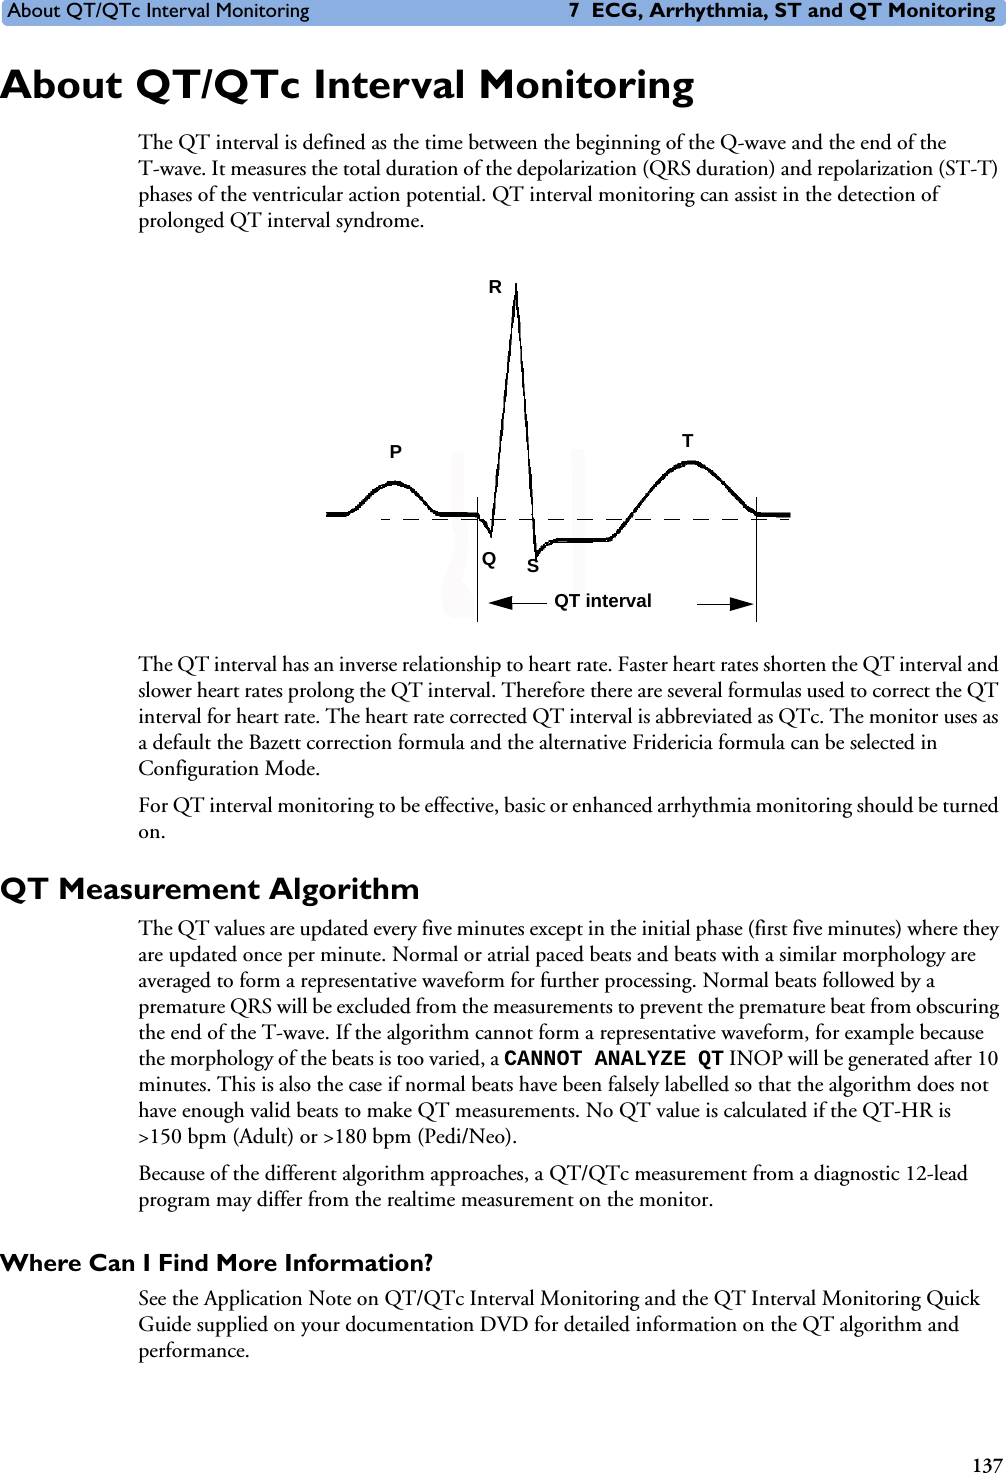 About QT/QTc Interval Monitoring 7 ECG, Arrhythmia, ST and QT Monitoring137About QT/QTc Interval MonitoringThe QT interval is defined as the time between the beginning of the Q-wave and the end of the T-wave. It measures the total duration of the depolarization (QRS duration) and repolarization (ST-T) phases of the ventricular action potential. QT interval monitoring can assist in the detection of prolonged QT interval syndrome. The QT interval has an inverse relationship to heart rate. Faster heart rates shorten the QT interval and slower heart rates prolong the QT interval. Therefore there are several formulas used to correct the QT interval for heart rate. The heart rate corrected QT interval is abbreviated as QTc. The monitor uses as a default the Bazett correction formula and the alternative Fridericia formula can be selected in Configuration Mode. For QT interval monitoring to be effective, basic or enhanced arrhythmia monitoring should be turned on. QT Measurement AlgorithmThe QT values are updated every five minutes except in the initial phase (first five minutes) where they are updated once per minute. Normal or atrial paced beats and beats with a similar morphology are averaged to form a representative waveform for further processing. Normal beats followed by a premature QRS will be excluded from the measurements to prevent the premature beat from obscuring the end of the T-wave. If the algorithm cannot form a representative waveform, for example because the morphology of the beats is too varied, a CANNOT ANALYZE QT INOP will be generated after 10 minutes. This is also the case if normal beats have been falsely labelled so that the algorithm does not have enough valid beats to make QT measurements. No QT value is calculated if the QT-HR is &gt;150 bpm (Adult) or &gt;180 bpm (Pedi/Neo).Because of the different algorithm approaches, a QT/QTc measurement from a diagnostic 12-lead program may differ from the realtime measurement on the monitor. Where Can I Find More Information? See the Application Note on QT/QTc Interval Monitoring and the QT Interval Monitoring Quick Guide supplied on your documentation DVD for detailed information on the QT algorithm and performance.TQSPRQT interval